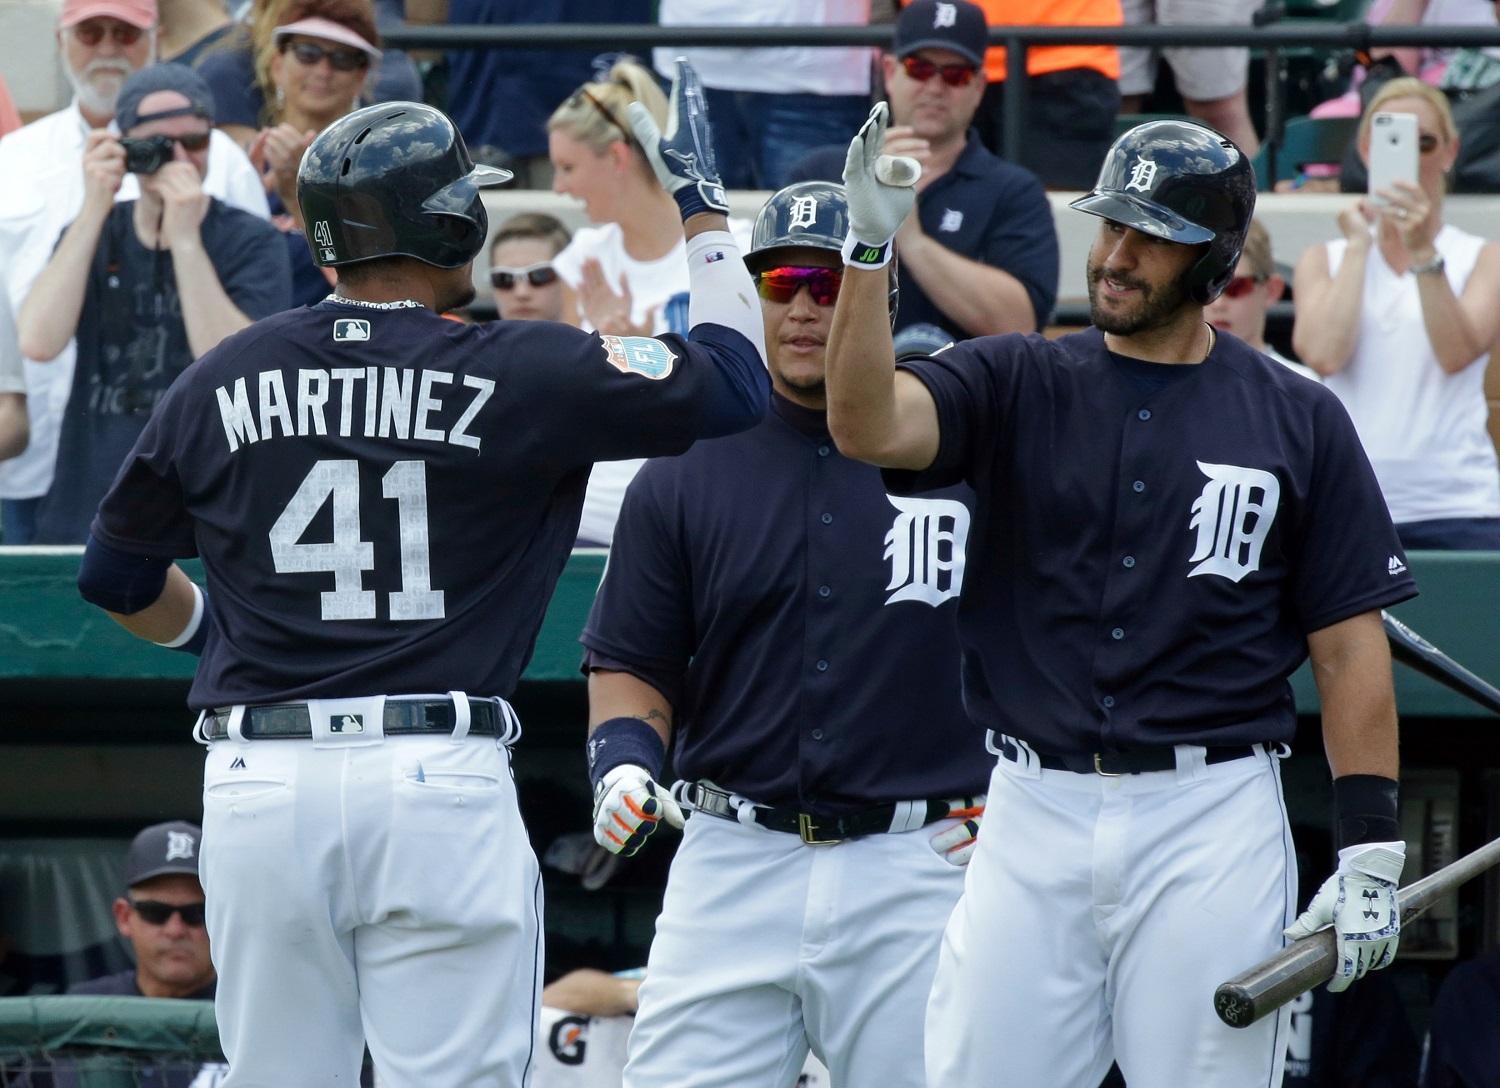 After hitting a home run in the first inning against the New York Yankees, Detroit Tigers' Victor Martinez (41) is greeted by teammates Miguel Cabrera, center, and J.D. Martinez, right, in a spring training baseball game, Thursday, March 31, 2016, in Lakeland, Fla. (AP Photo/John Raoux)